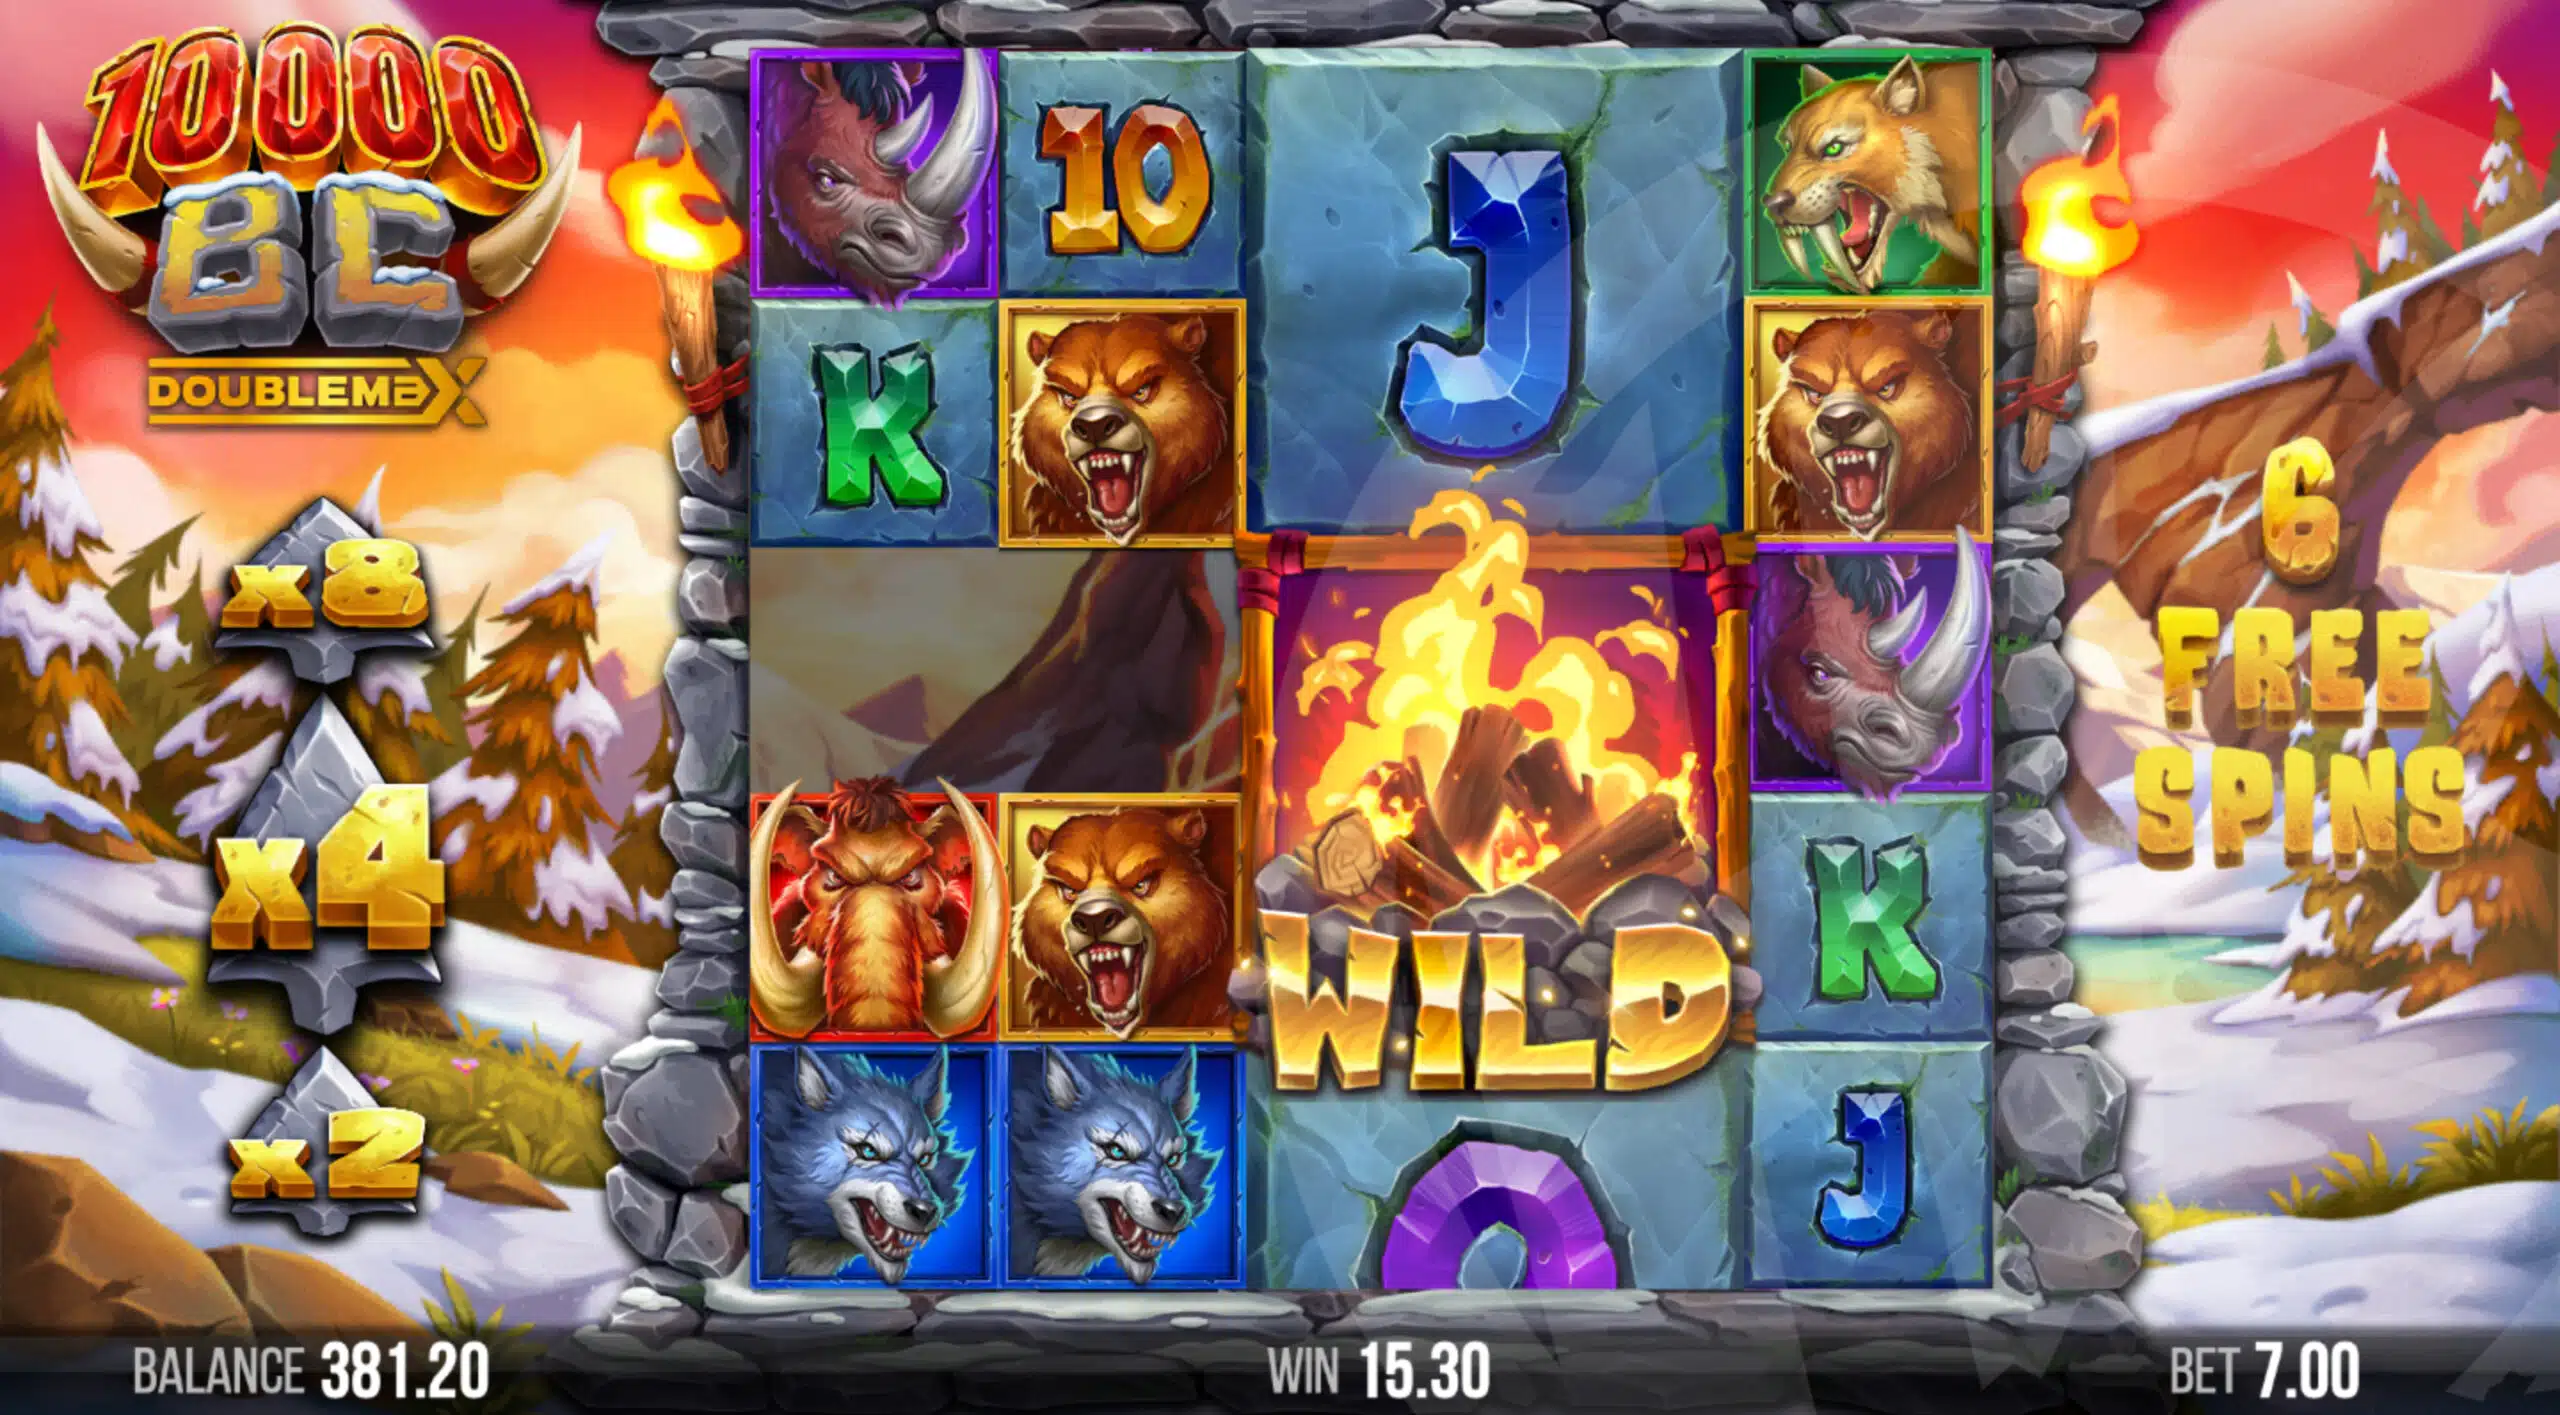 Wilds Are Added to the Reels Each Time Winning Symbols are Removed During Free Spins